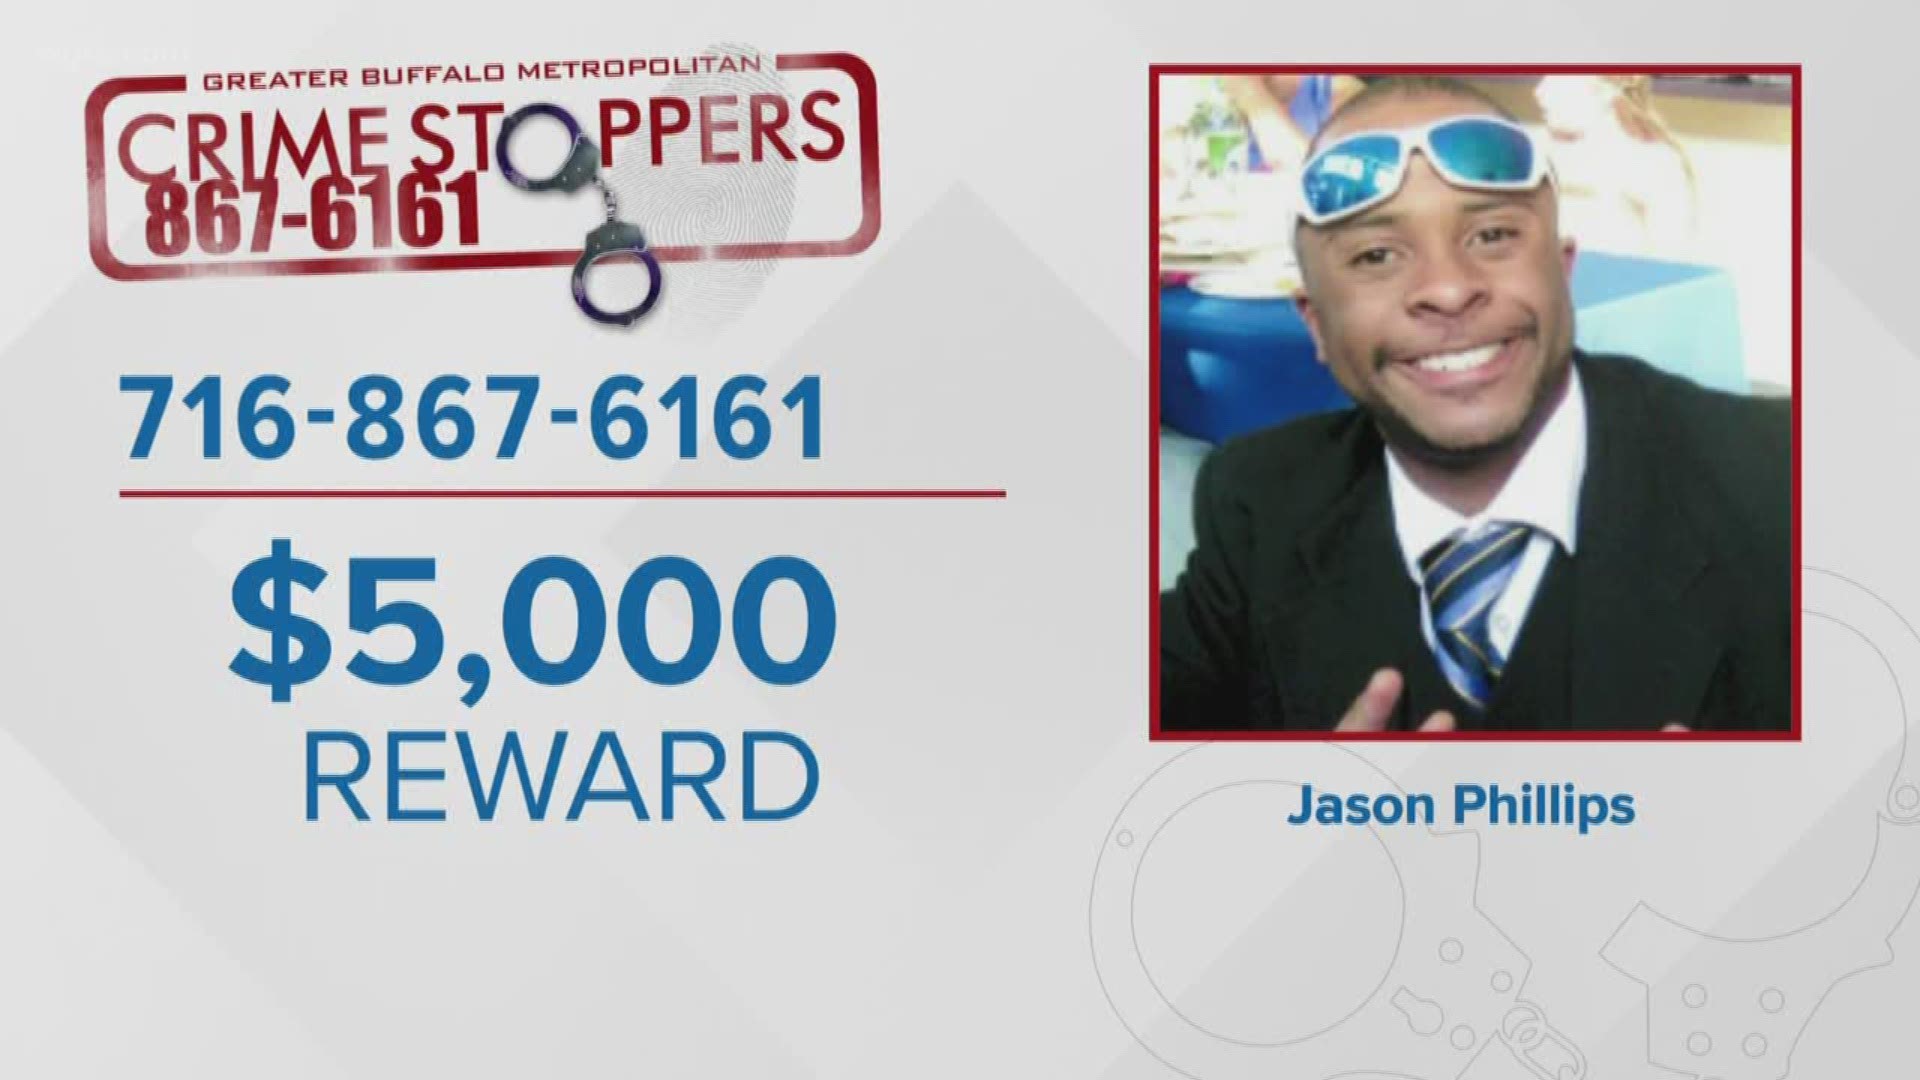 Crimestoppers Buffalo is offering $5 thousand for information leading to the arrest of the person who shot Jason Phillips on May 31